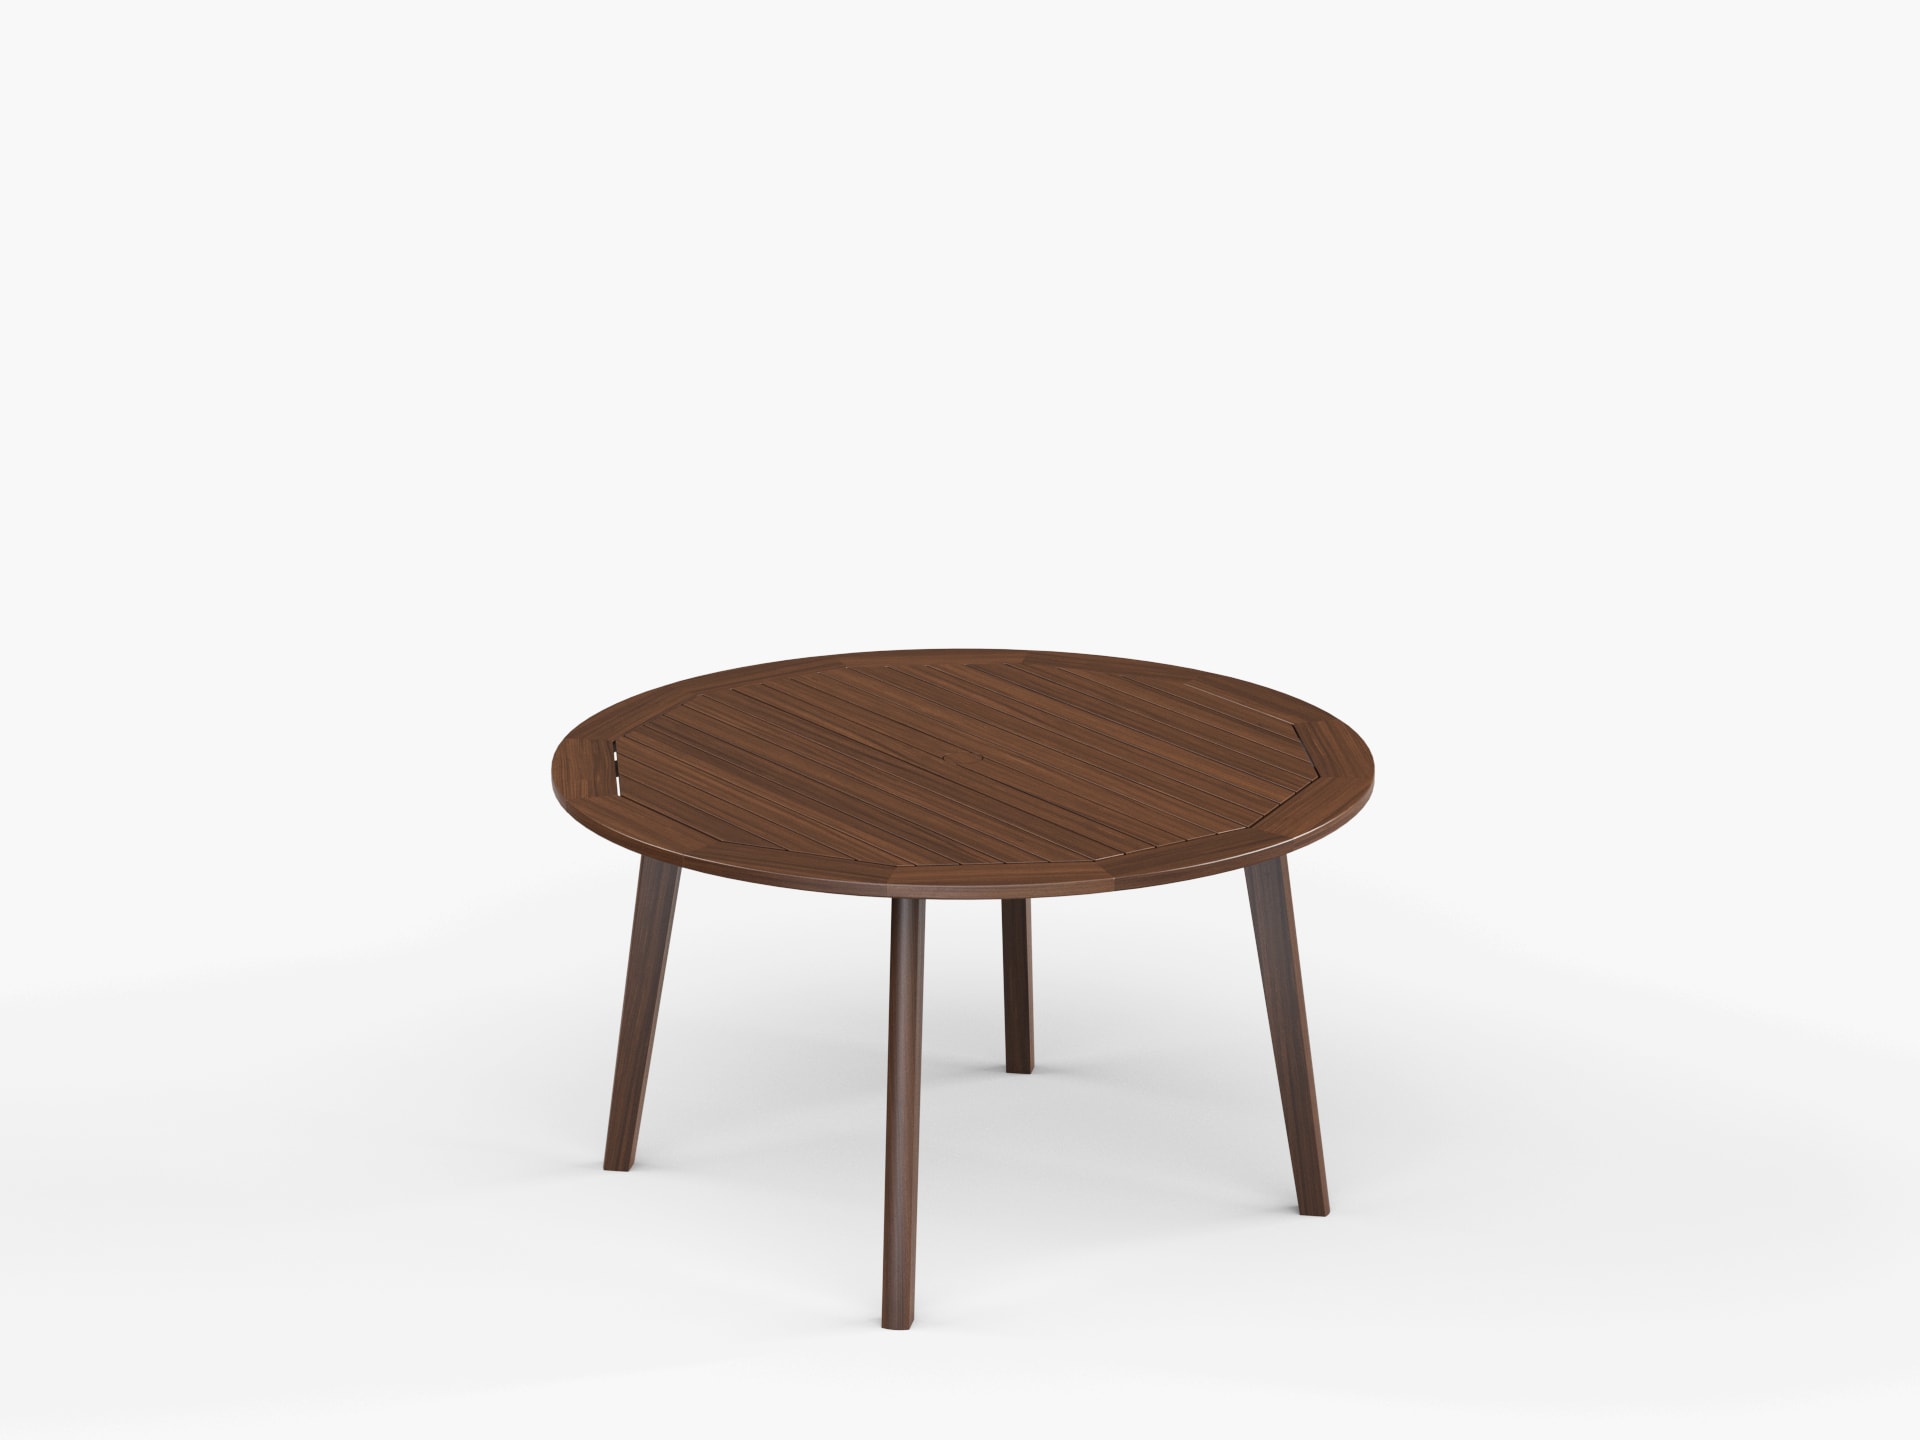 Foundations 52” Round Dining Table